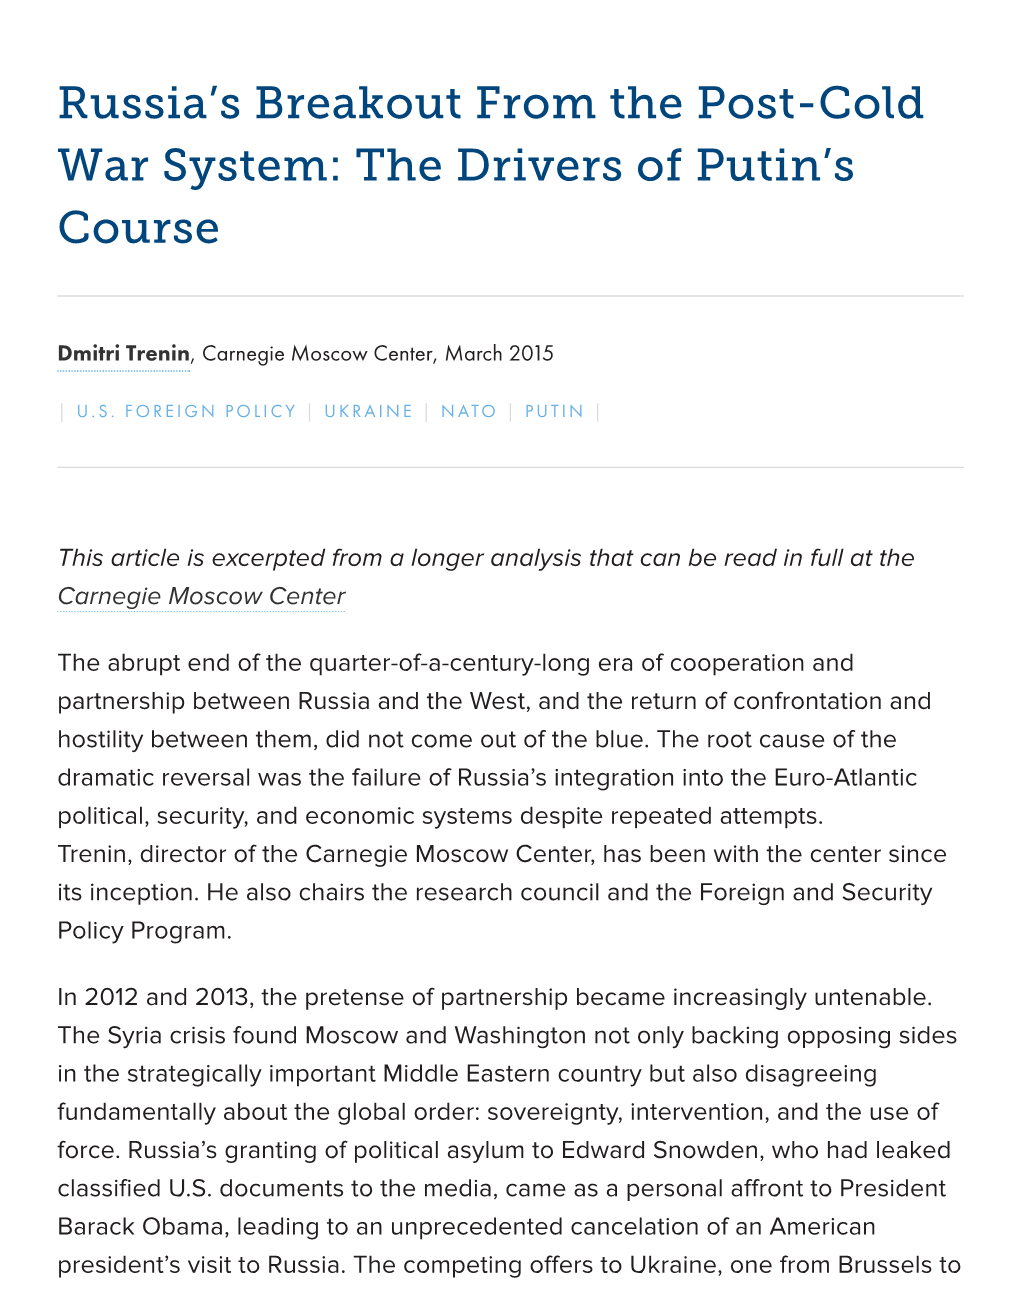 Russia's Breakout from the Post-Cold War System: the Drivers of Putin's